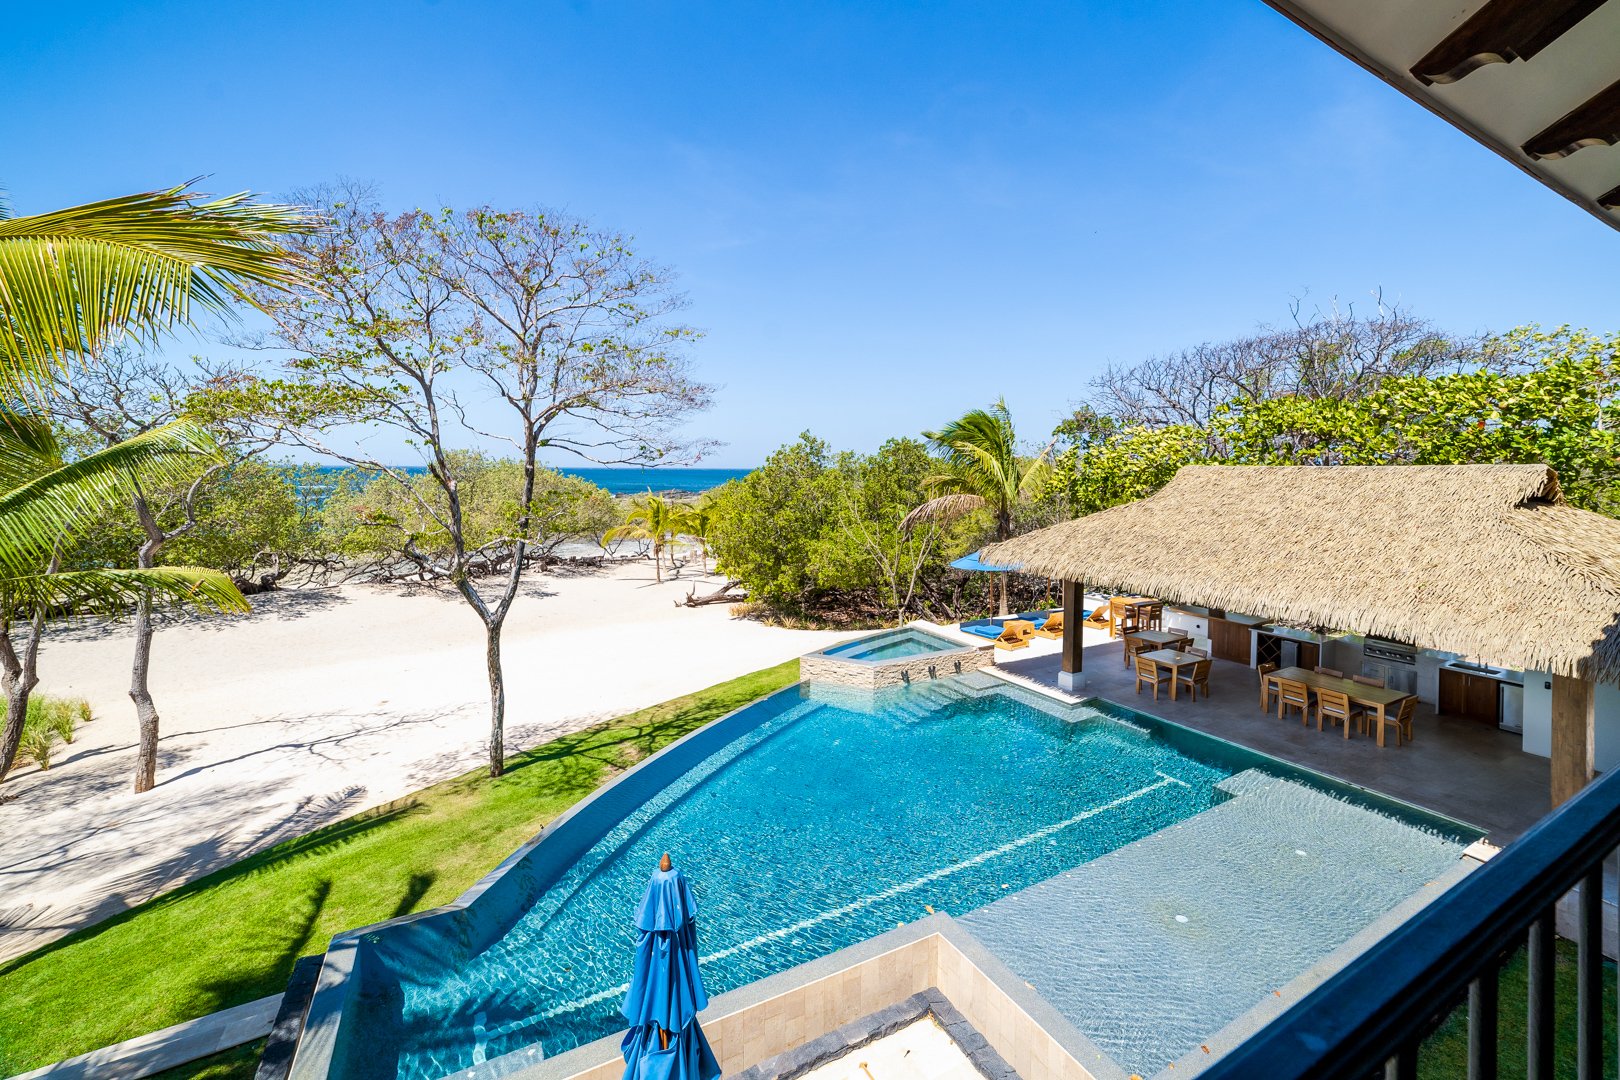 Surround yourself with white sand and turquoise waters in this unique and private beachfront paradise